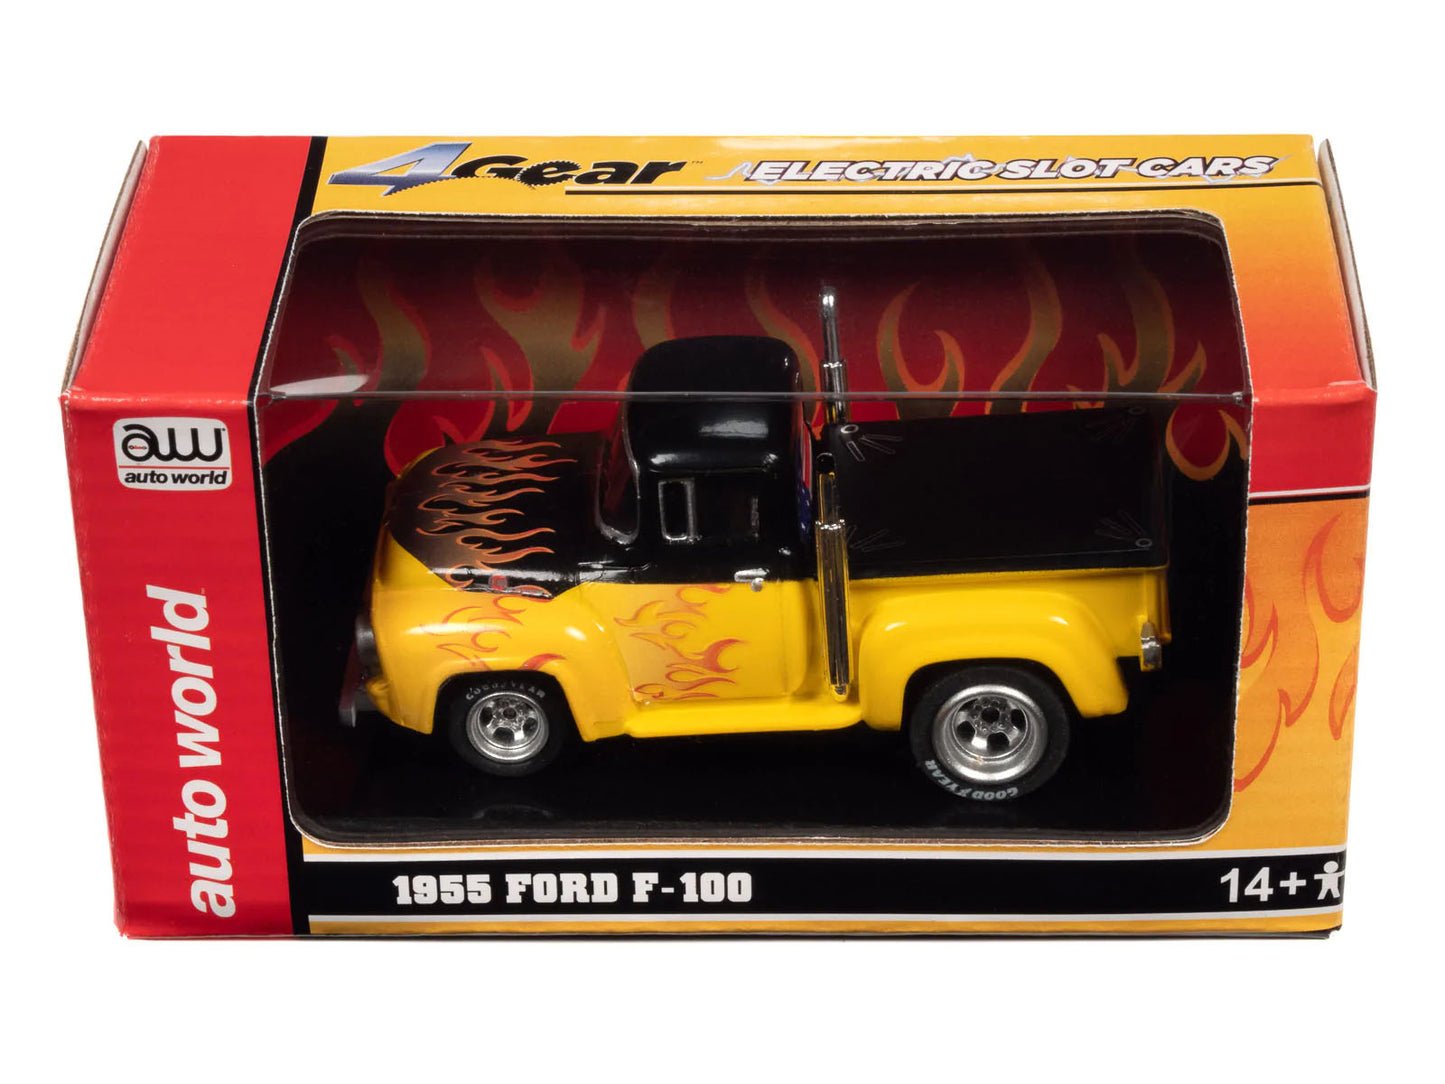 Auto World Ford F-100 Pickup Flames Exclusive 4Gear HO slot car Limited Edition - PowerHobby